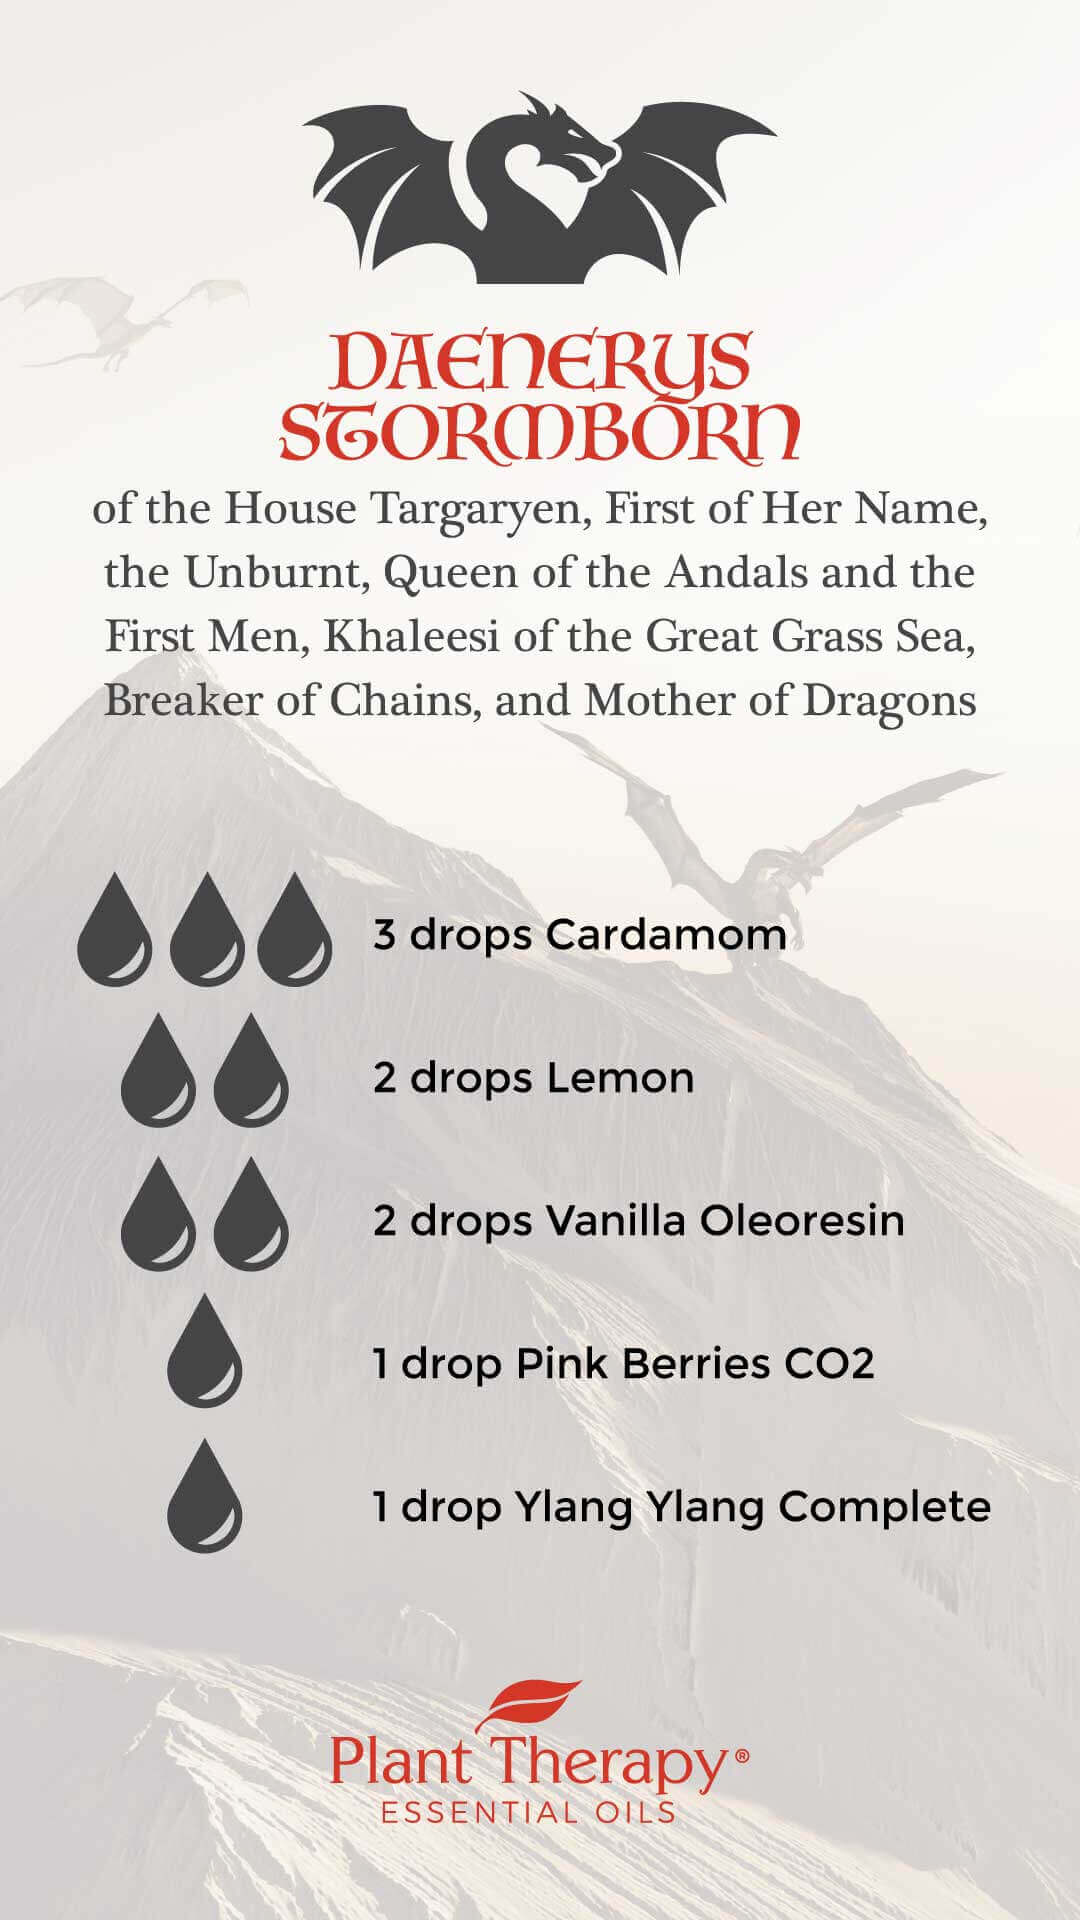 Game of Thrones Daenerys Diffuser Blend